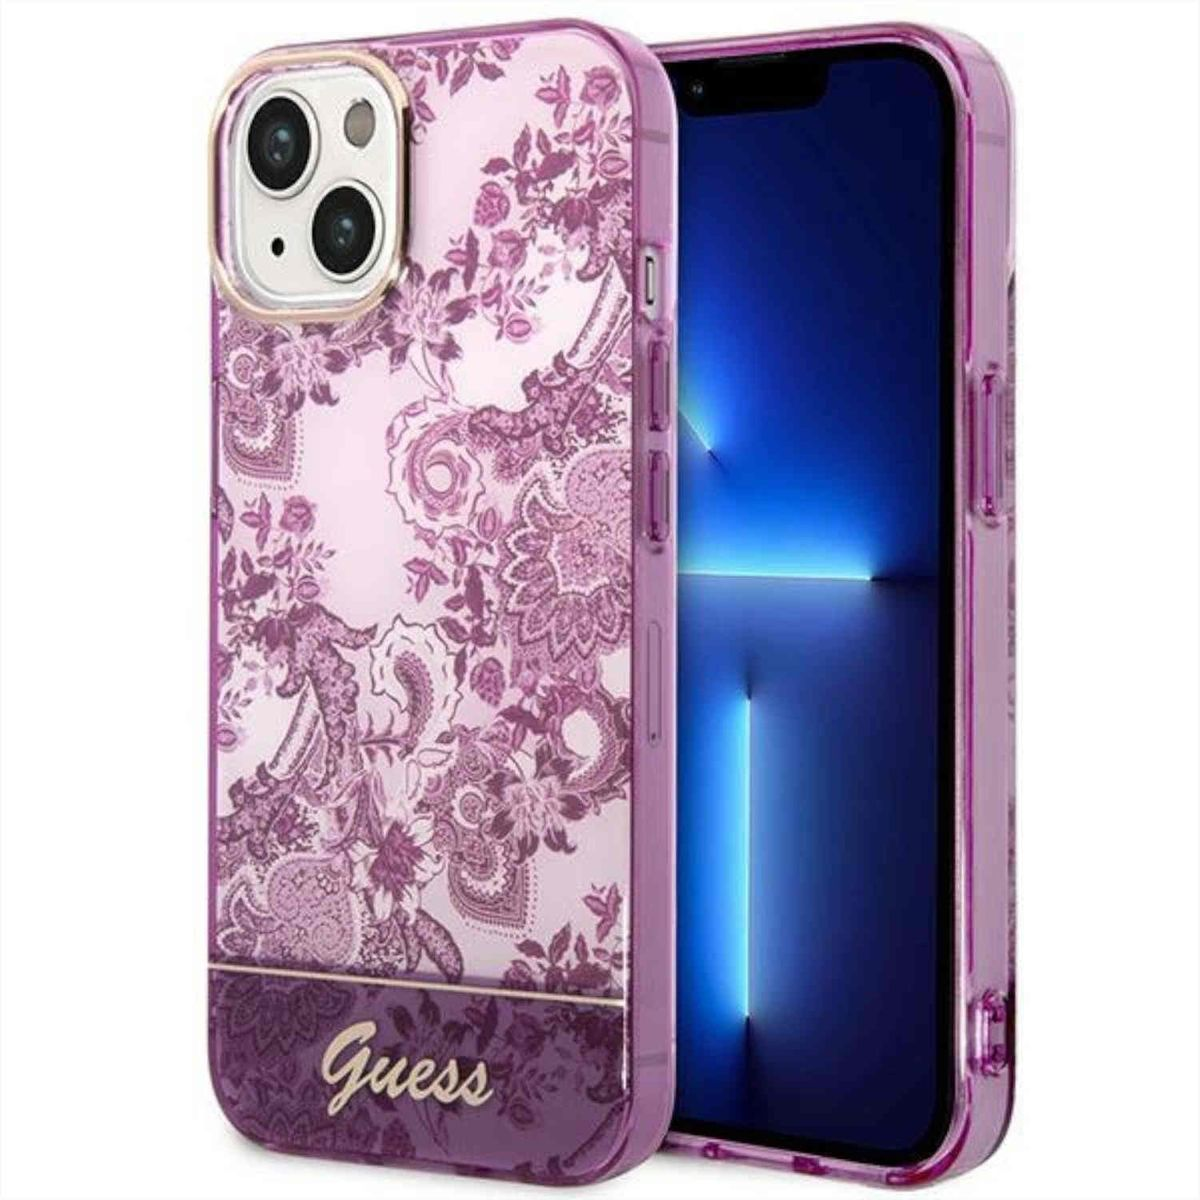 Backcover, Leder Design 14, PU Apple, iPhone GUESS Hülle, TPU Lila PC Muster / /